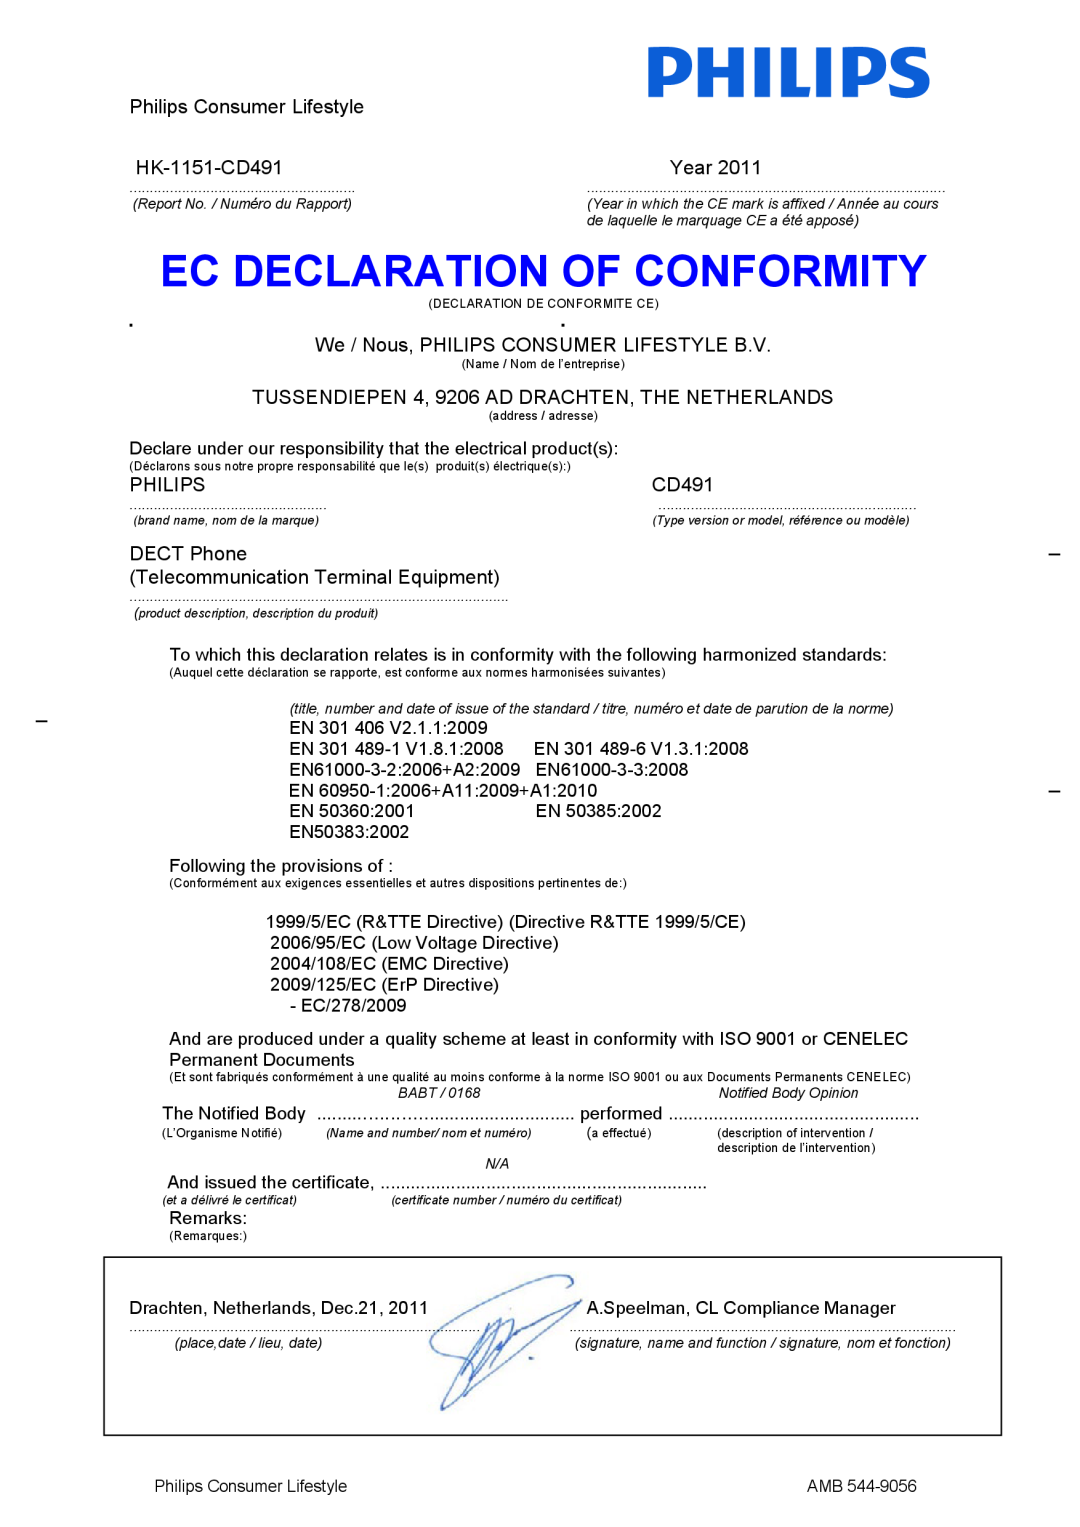 Philips CD496 user manual Ec Declaration Of Conformity, Philips Consumer Lifestyle, HK-1151-CD491, Year, DECT Phone 